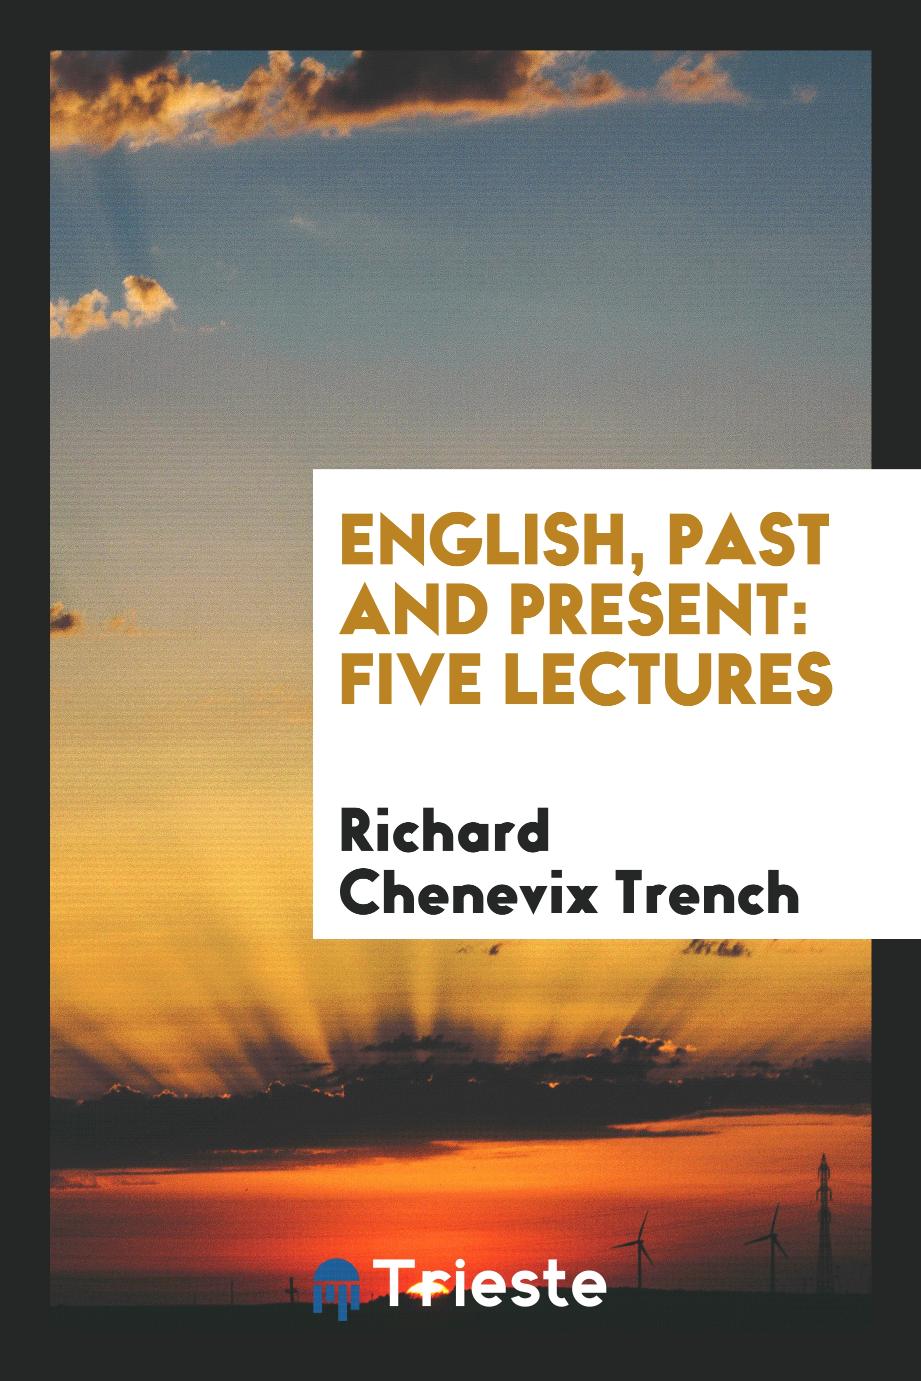 English, past and present: five lectures